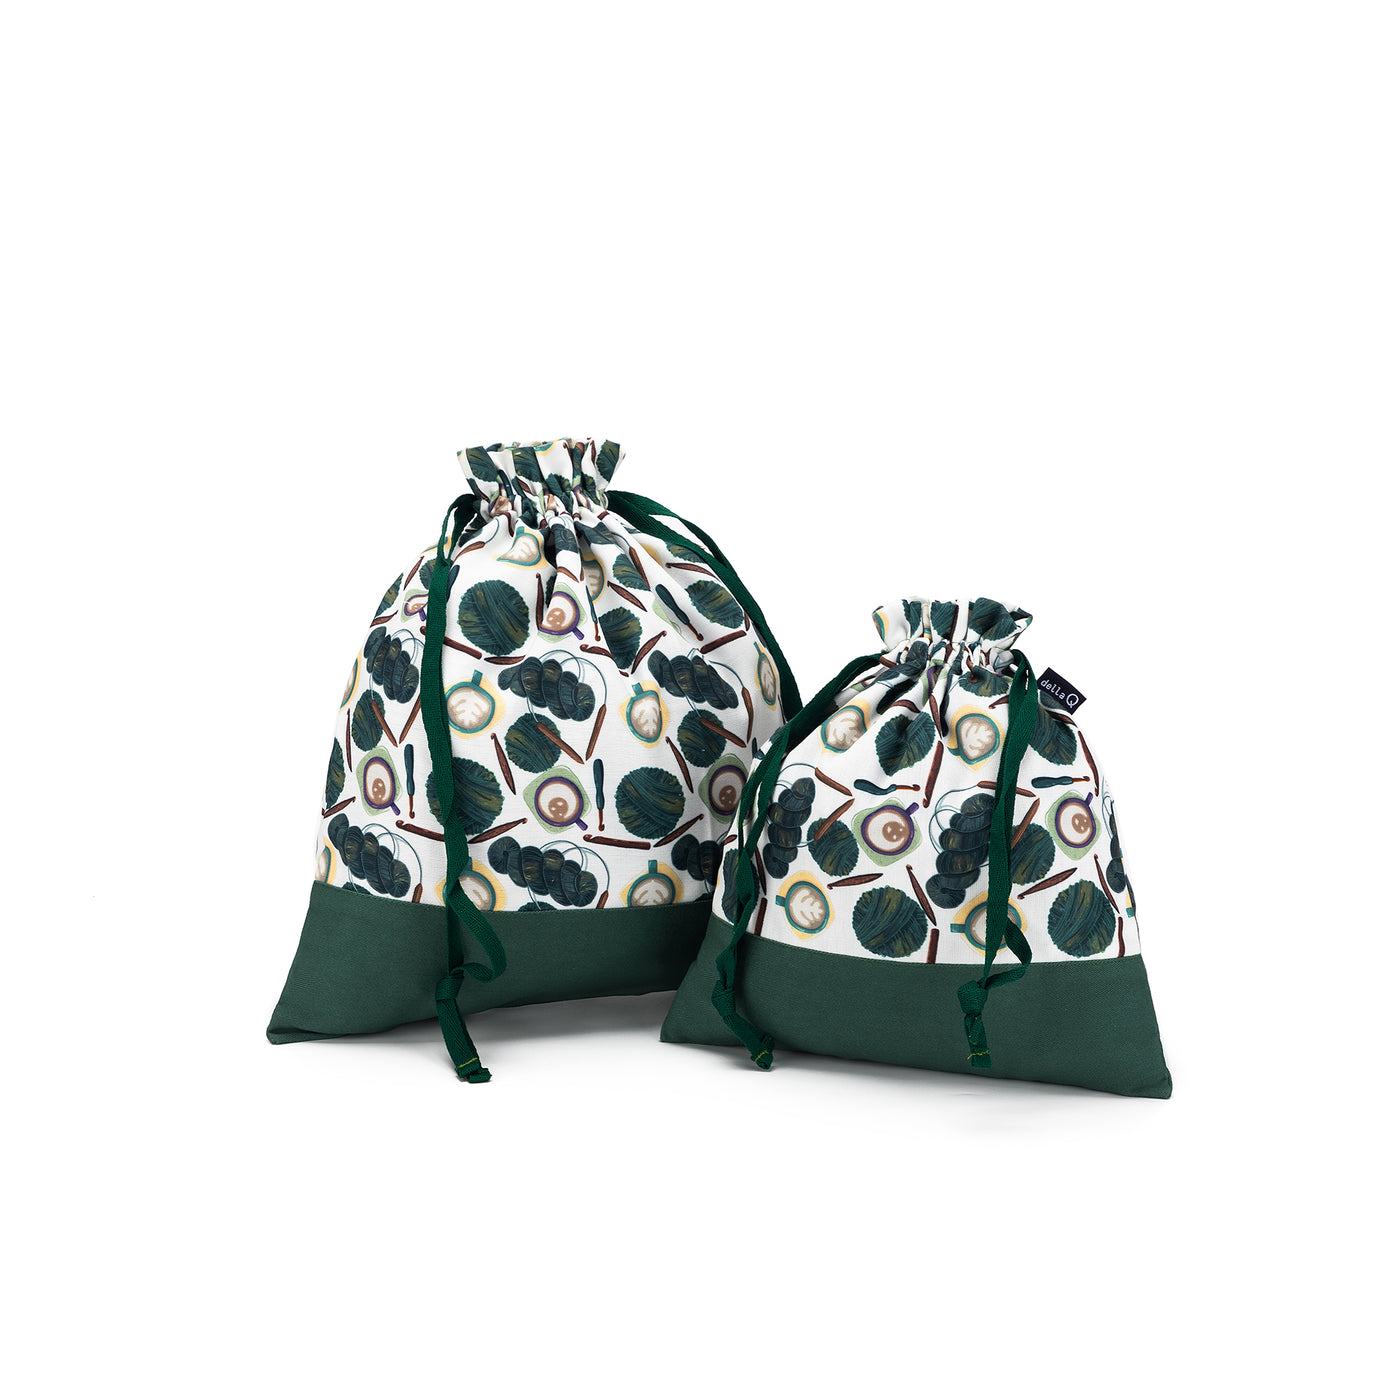 Small Eden Project Bag | Coffee and Yarn Green Fabric Print